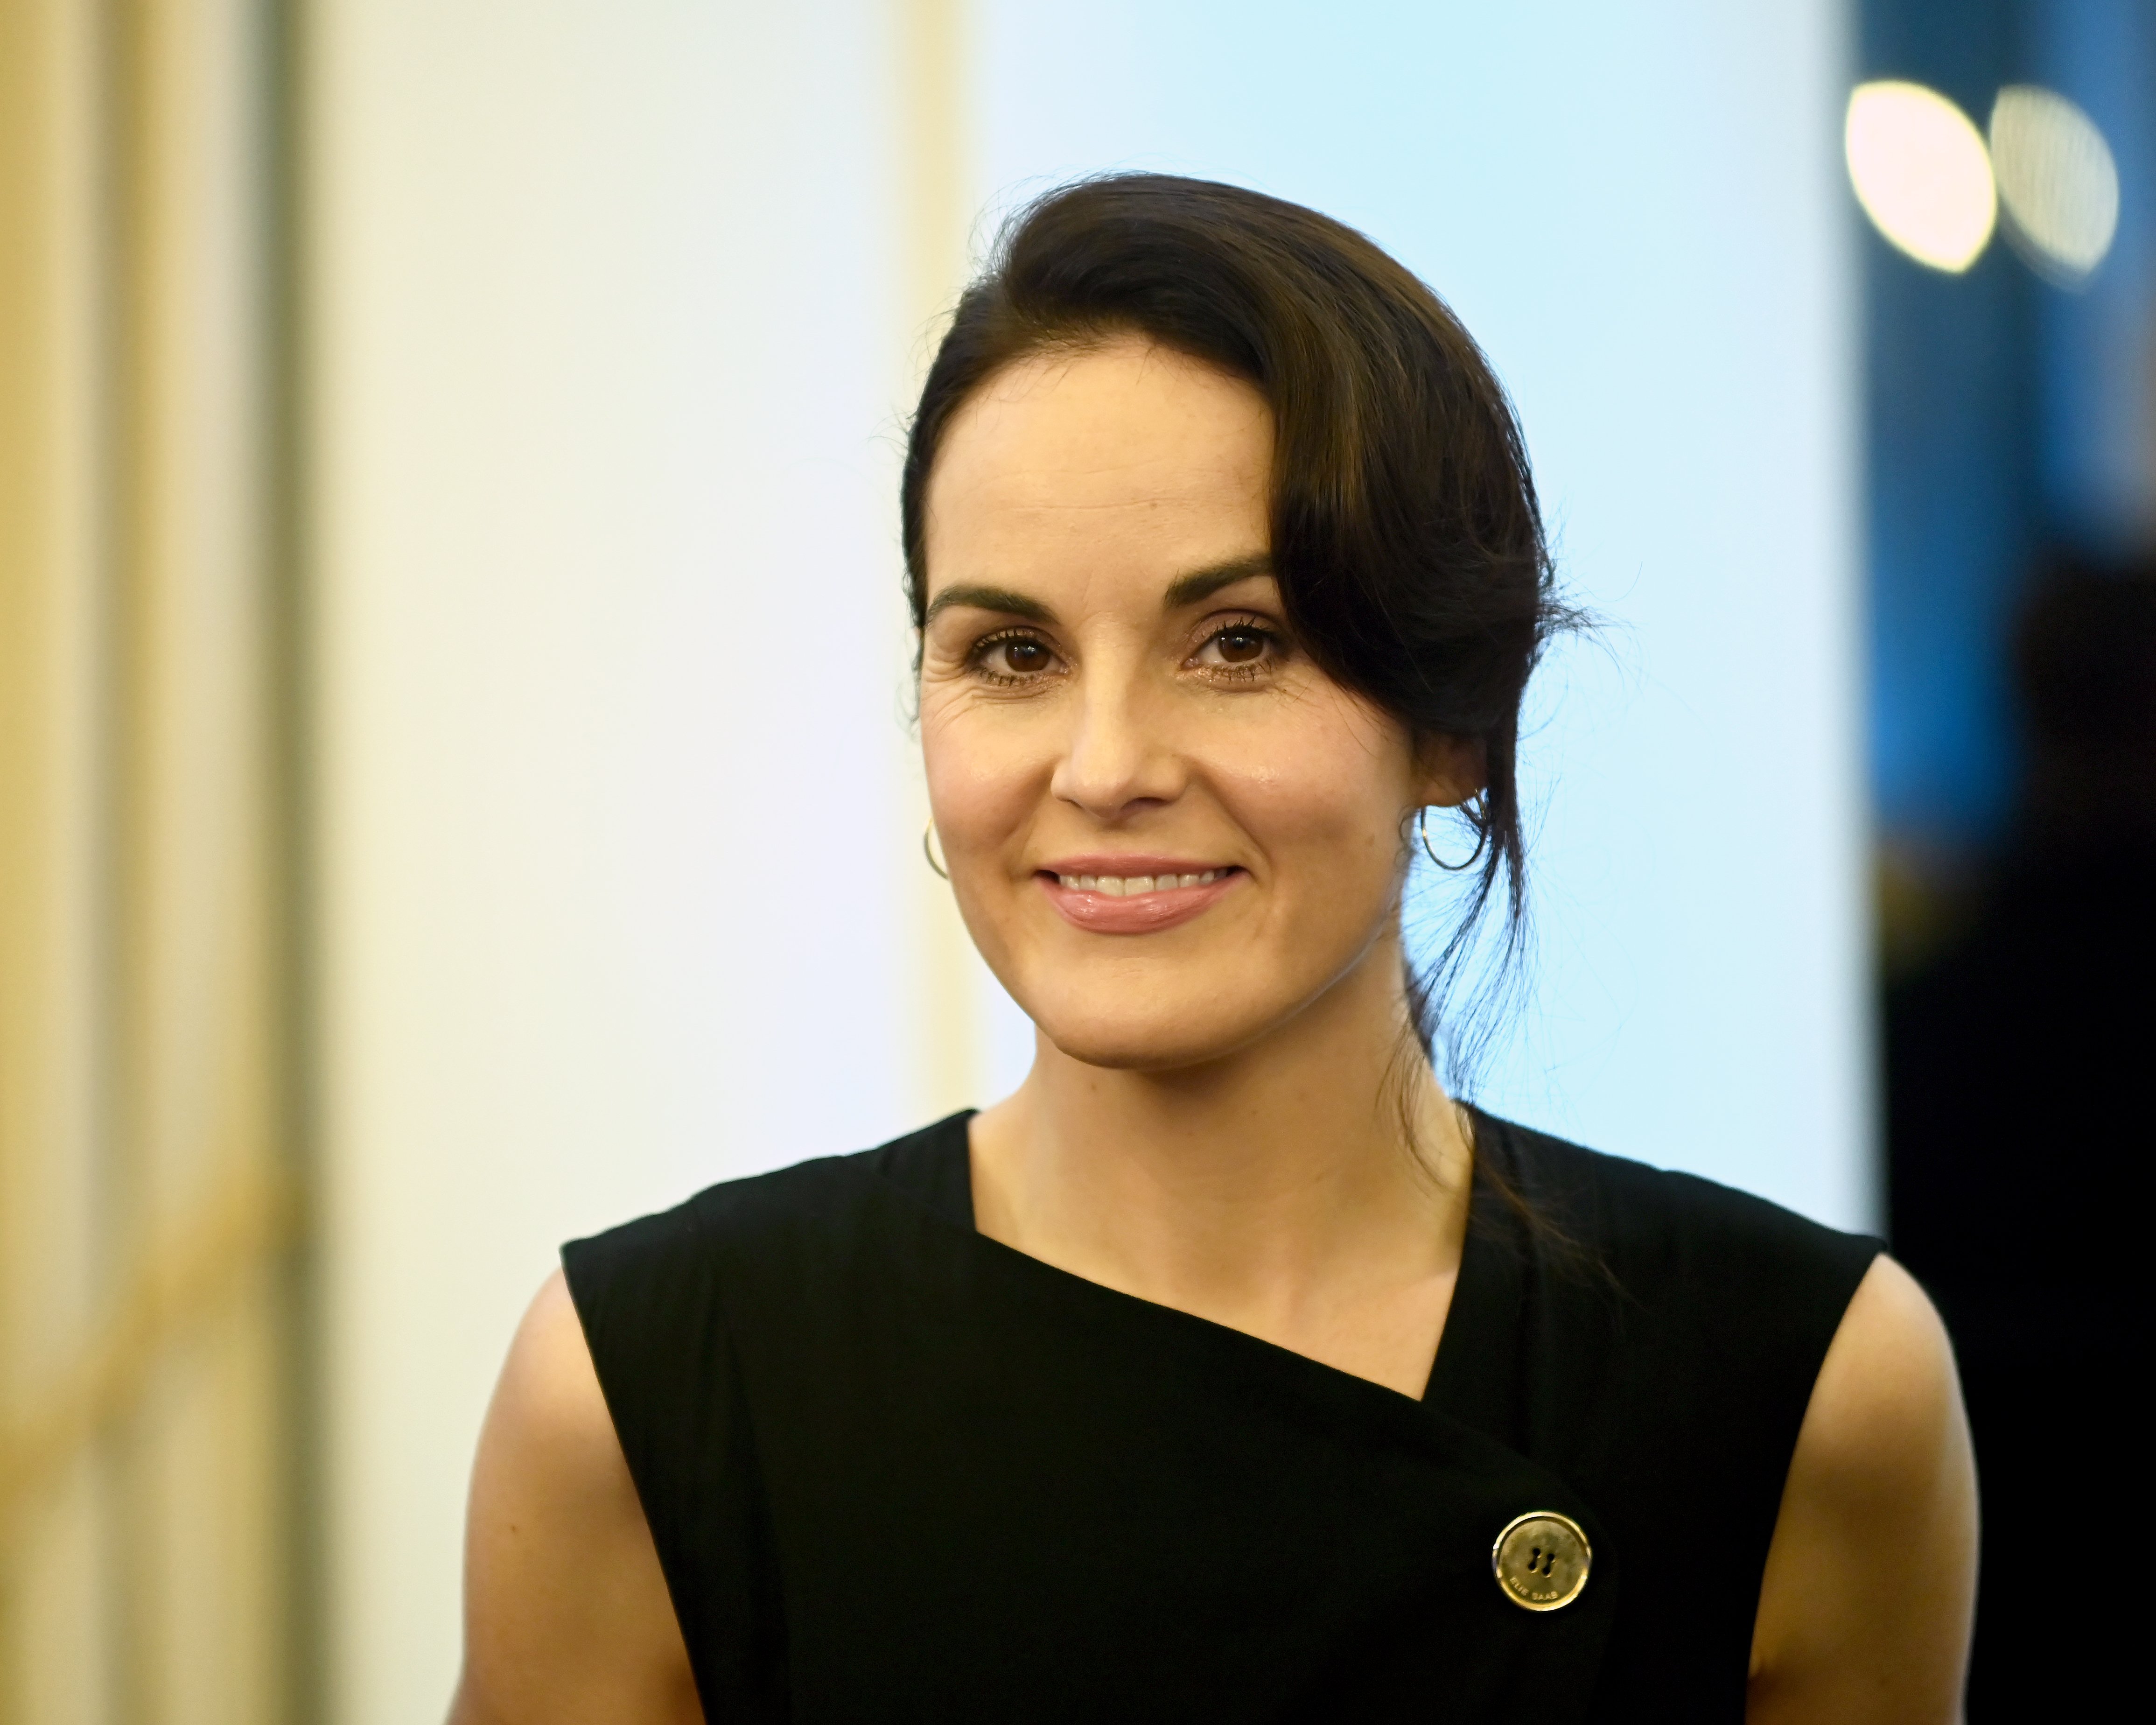 Actress Michelle Dockery at the "Downton Abbey" Washington, DC screening at the British Ambassador's Residence on September 12, 2019 in Washington, DC. | Source: Getty Images